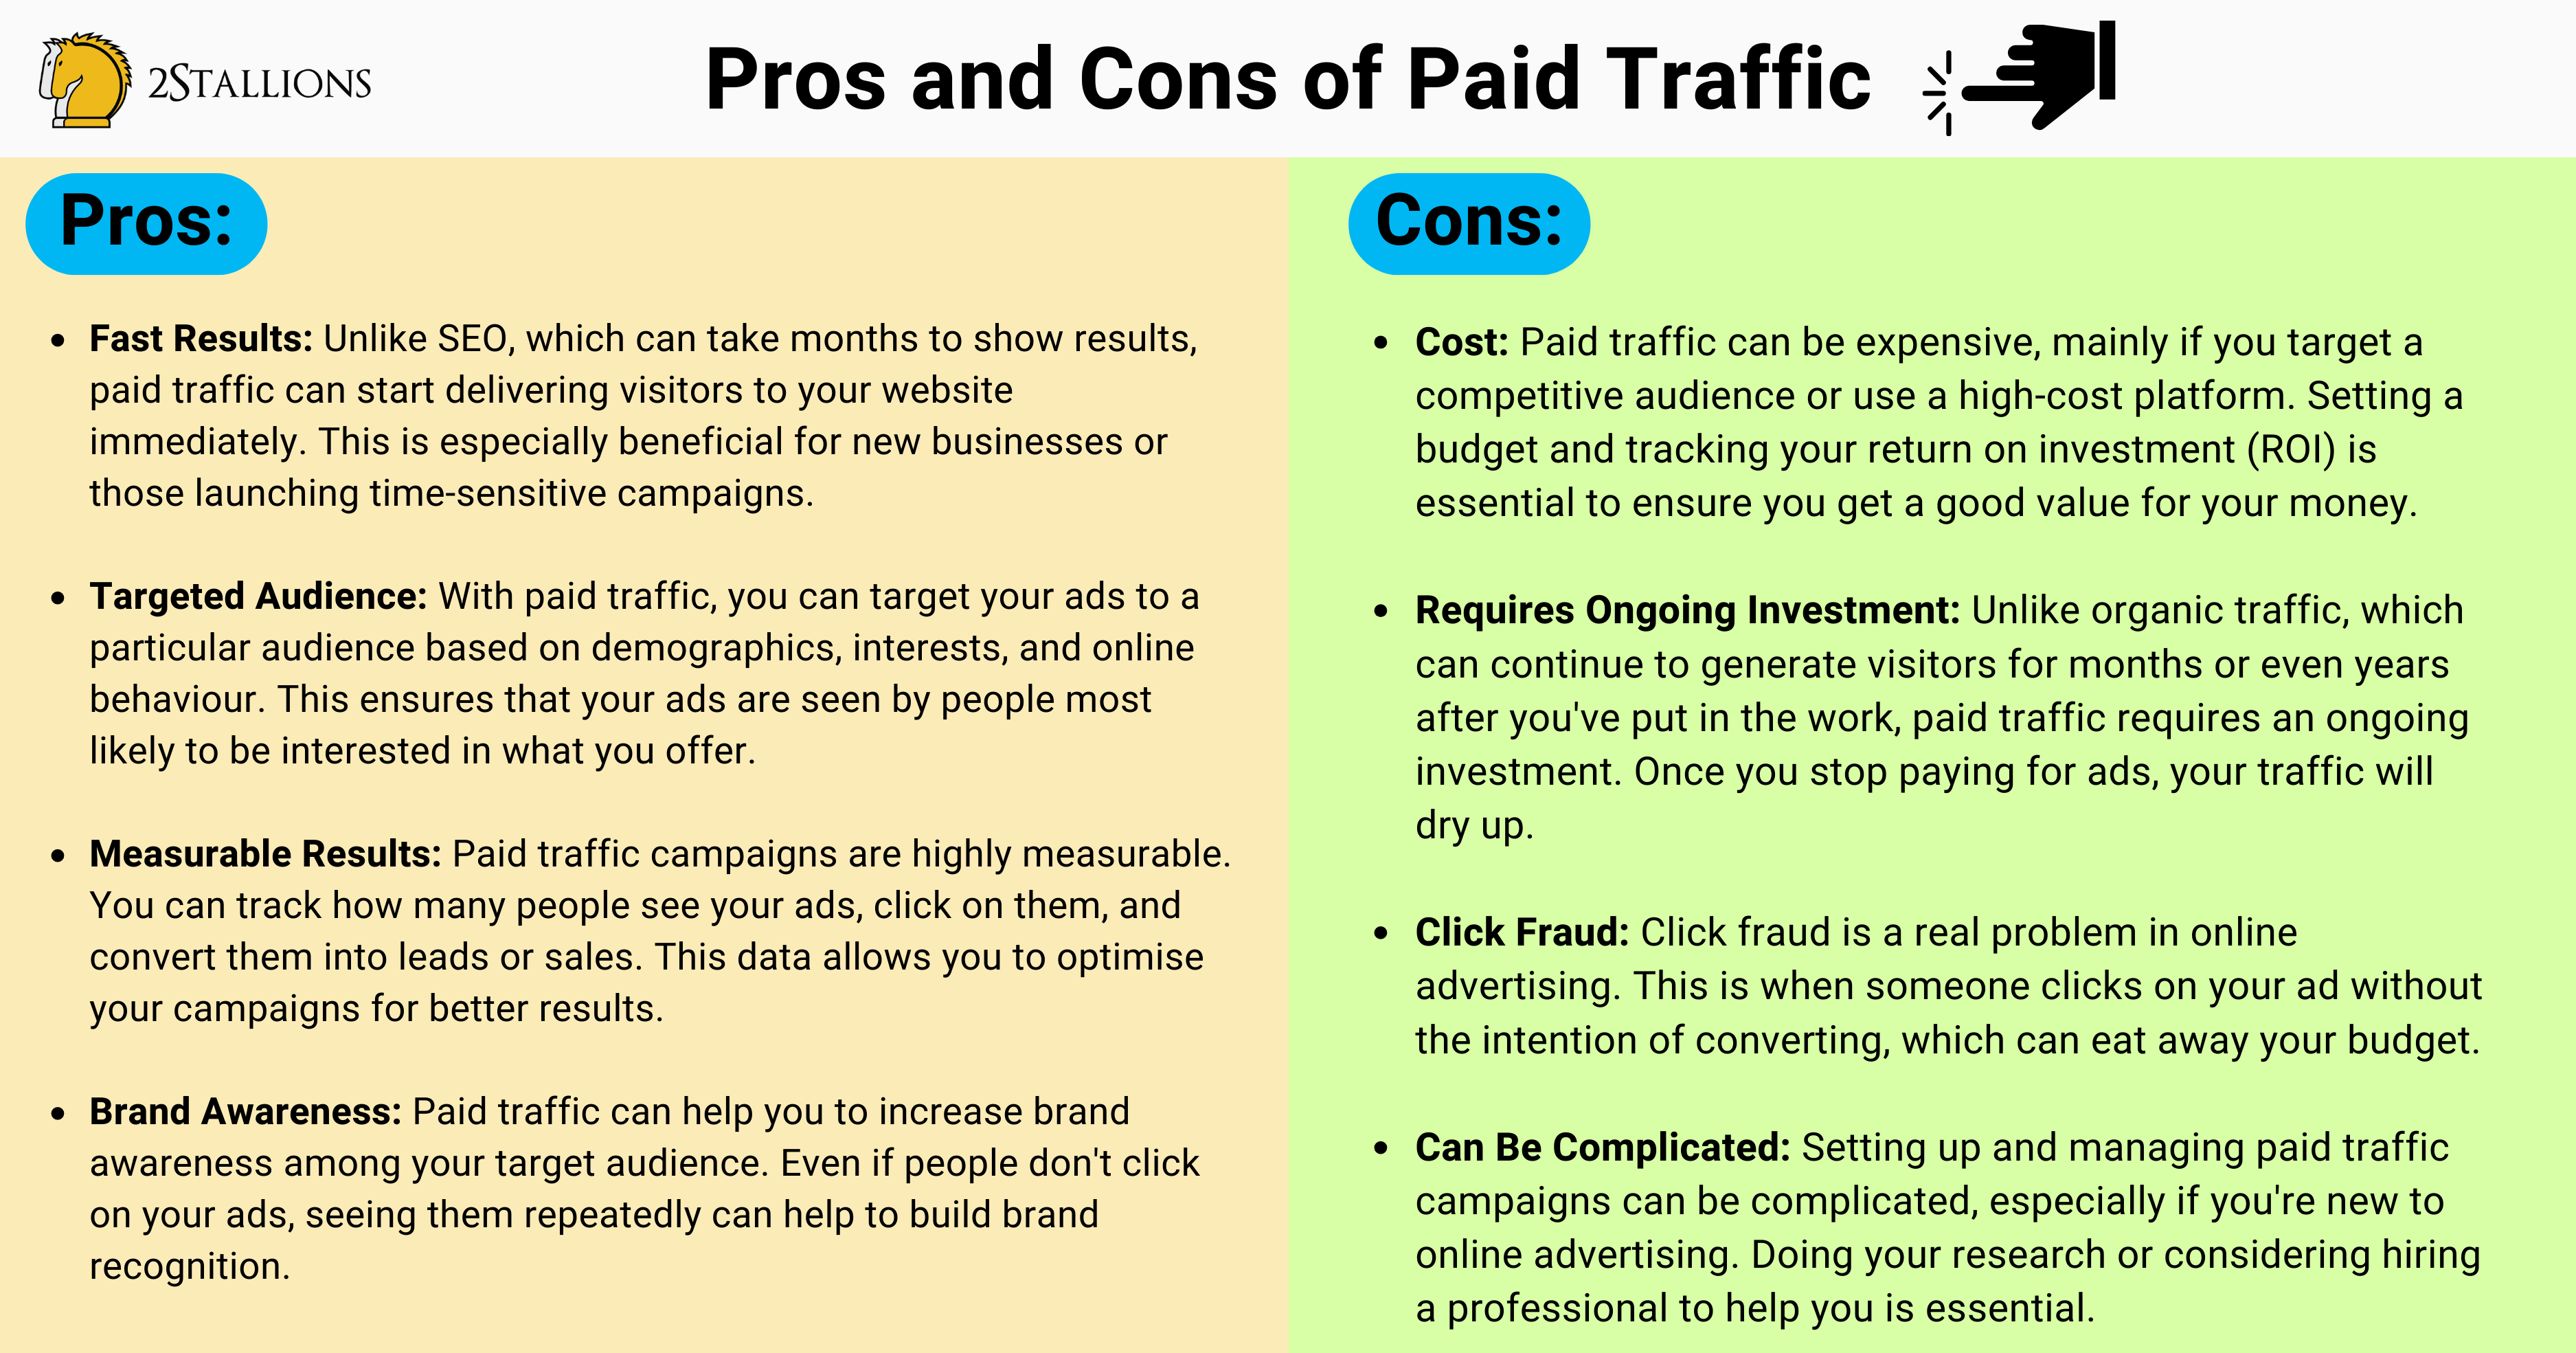 The Pros and Cons of Paid Traffic | 2Stallions